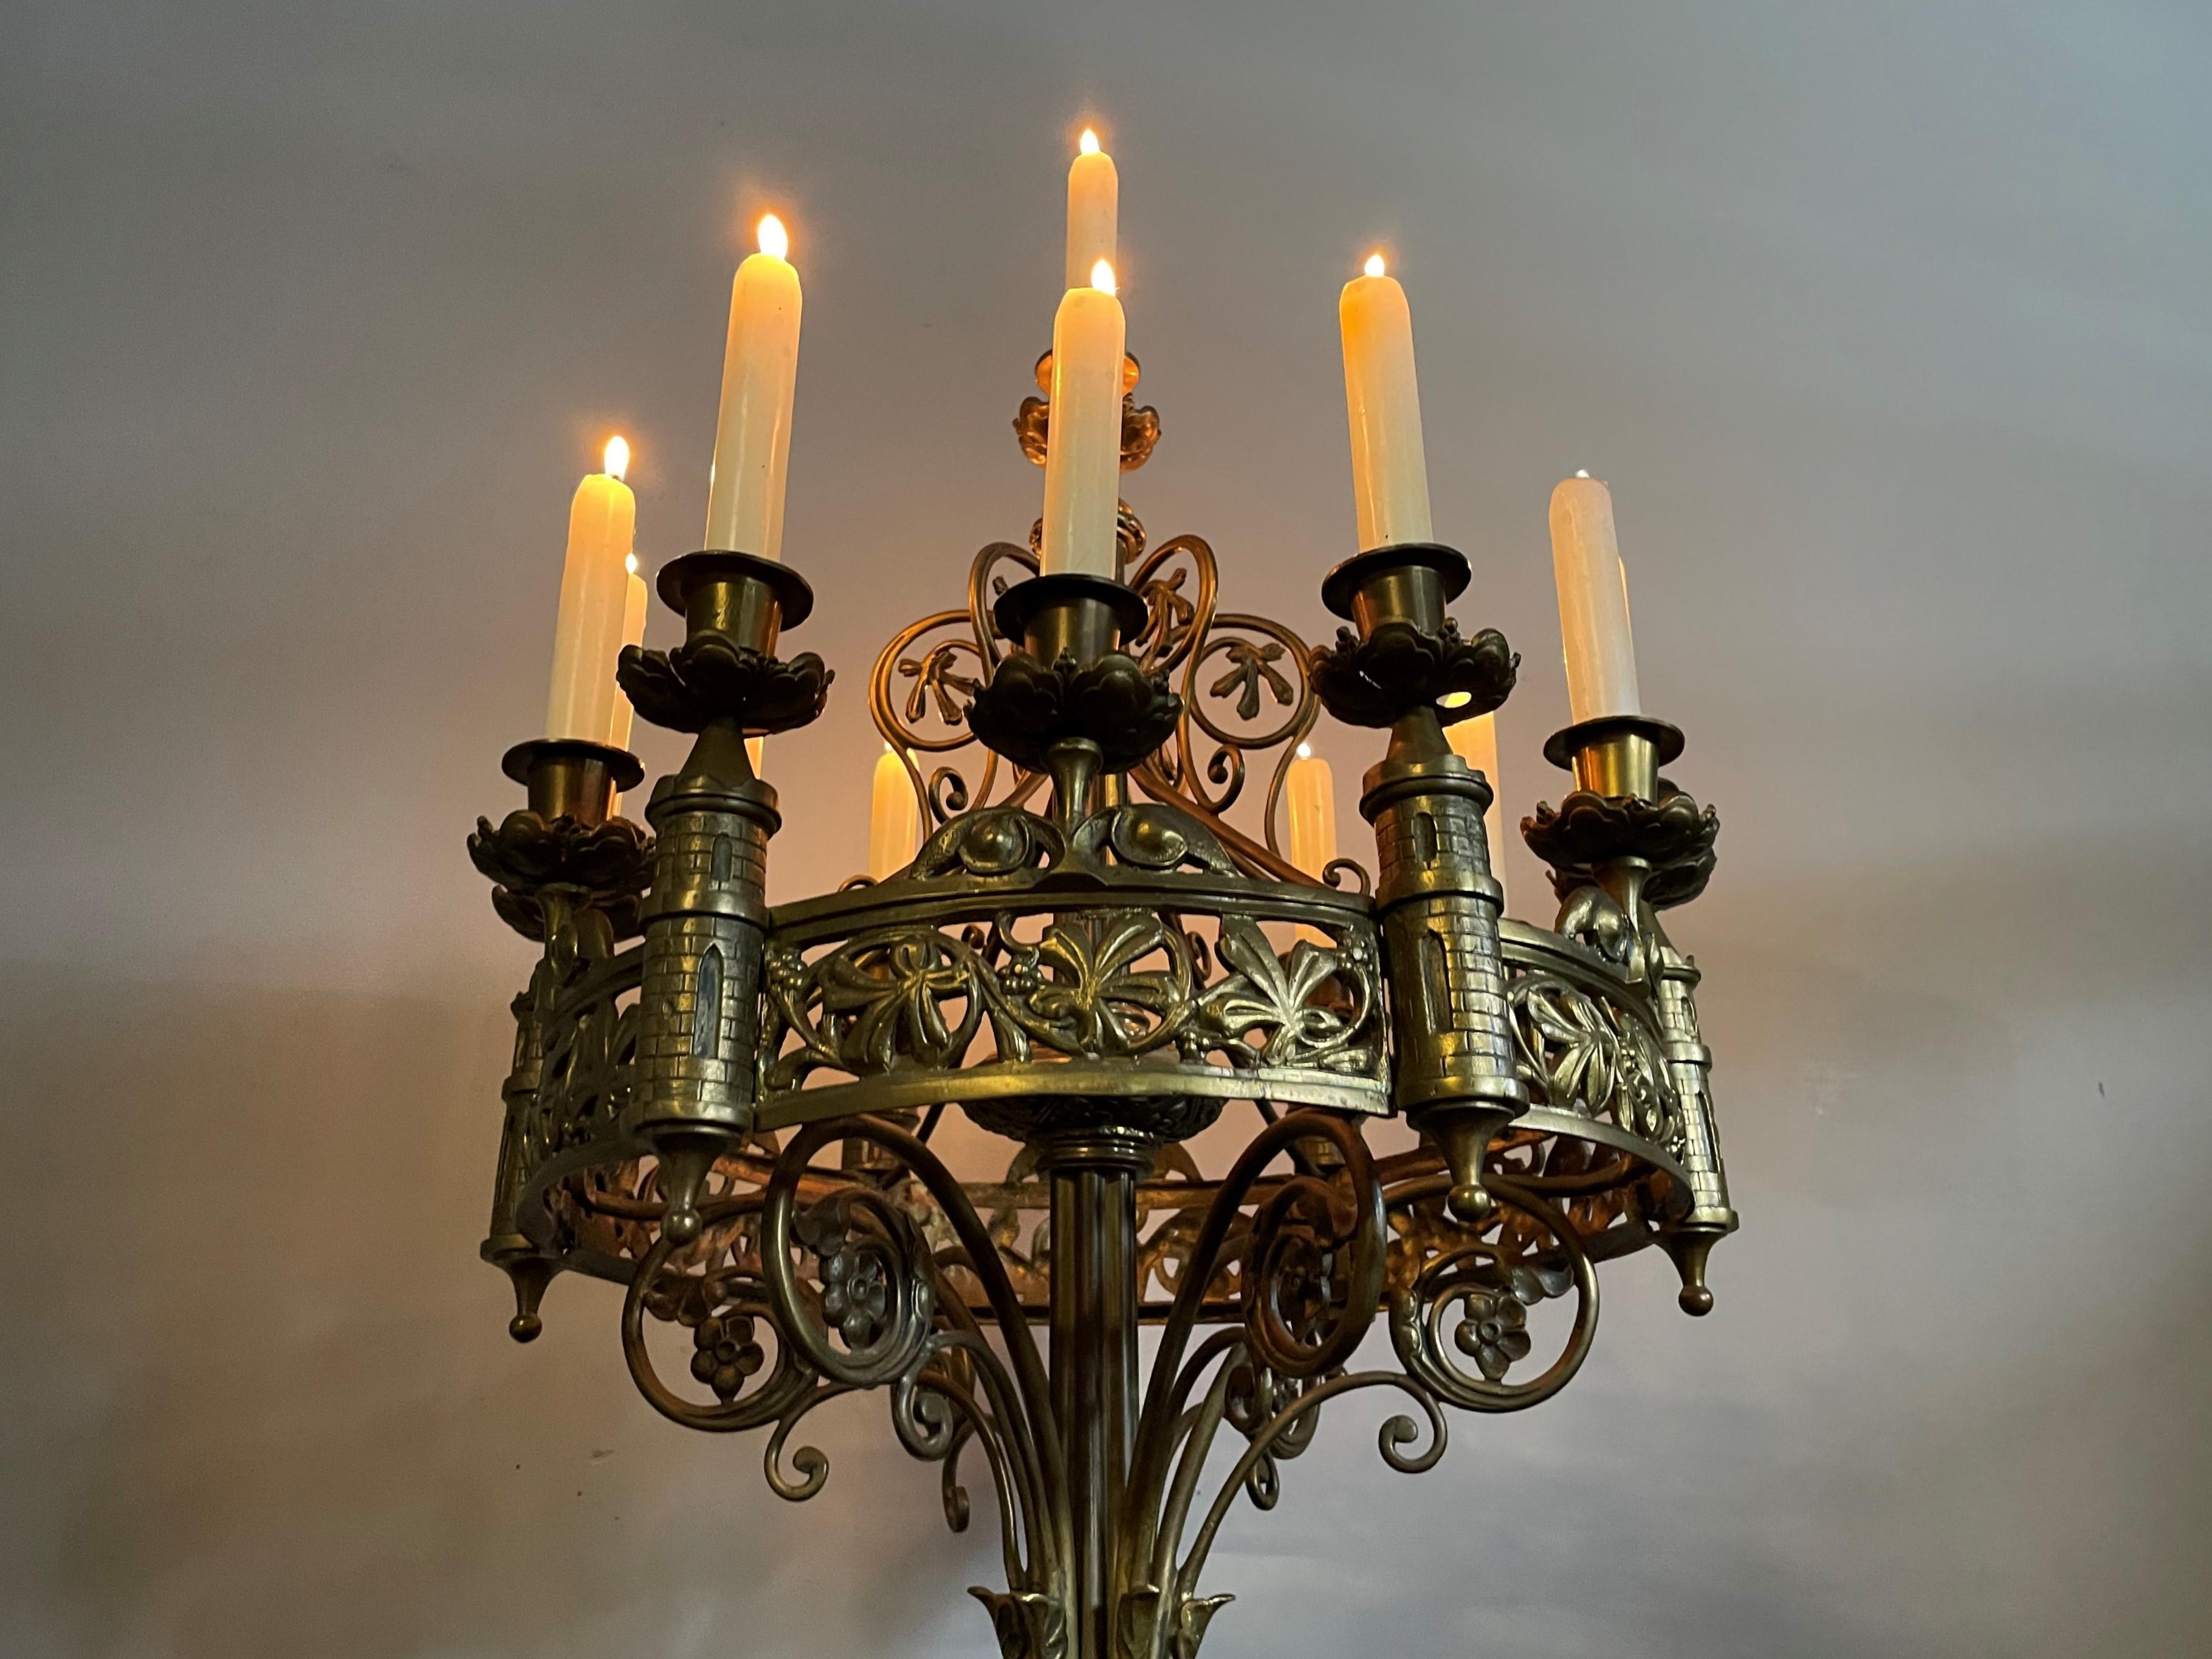 Antique Gothic Revival Bronze 13 Candle Table or Floor Candelabra with Gargoyles For Sale 2